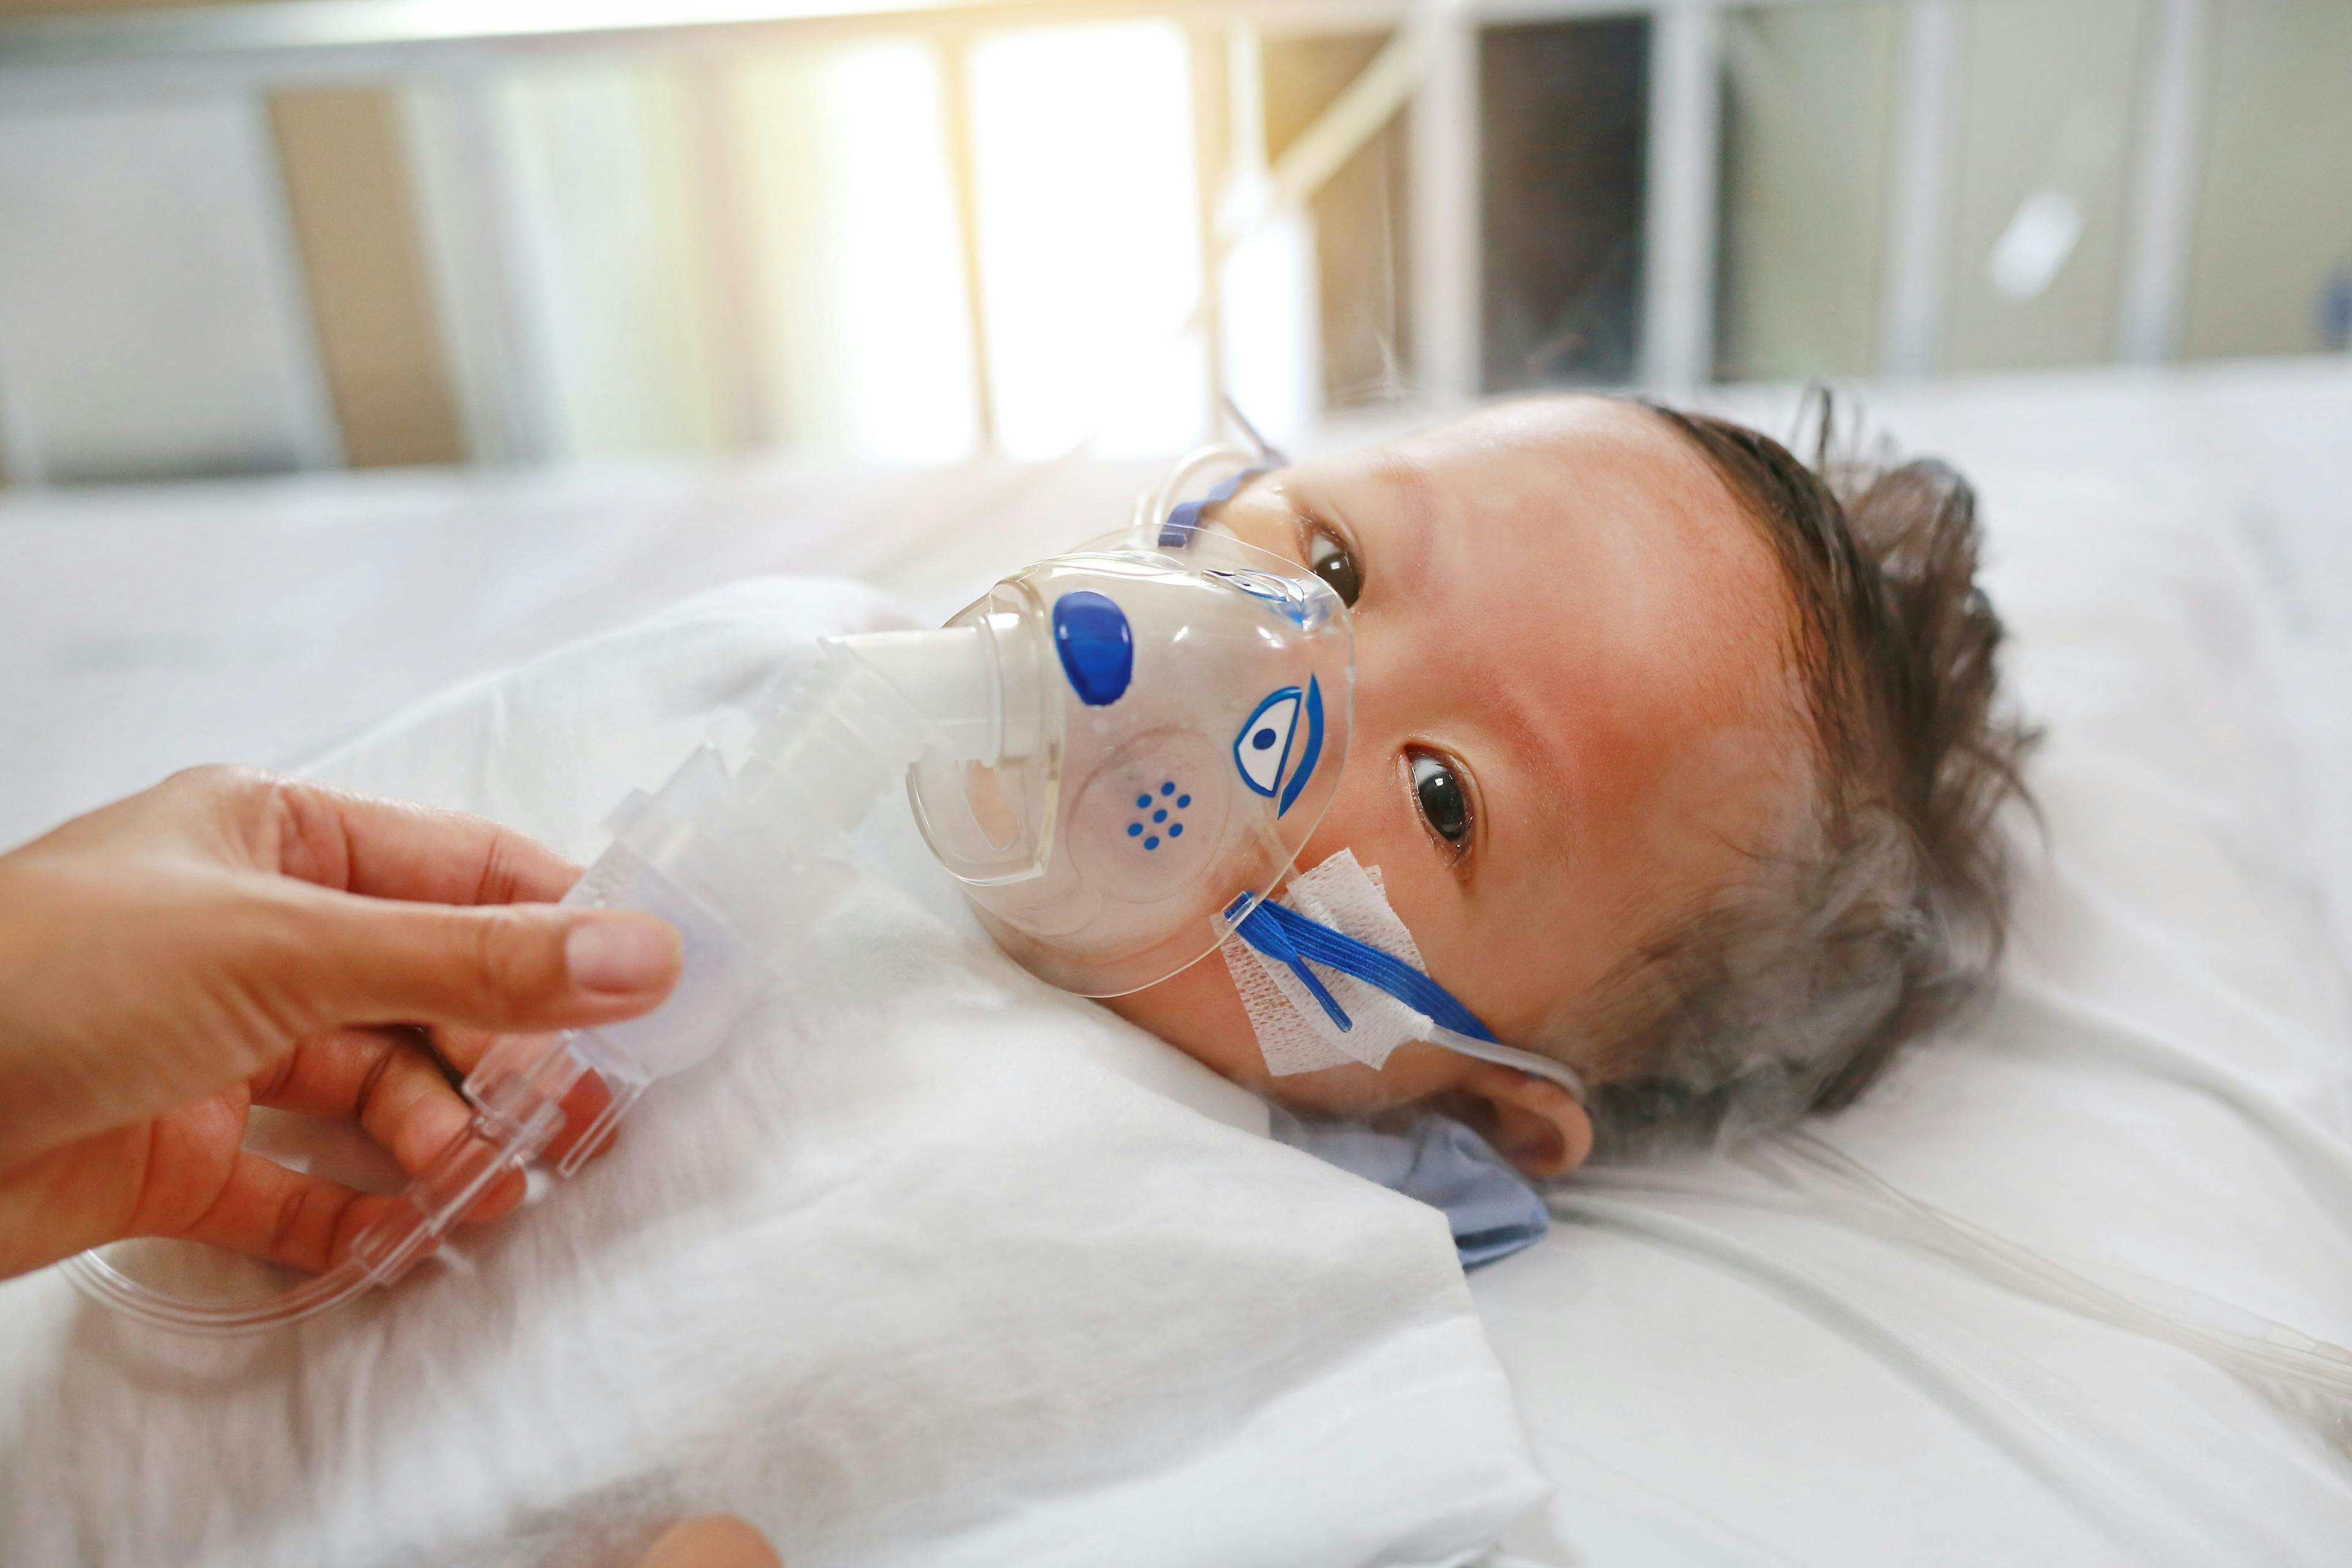 Sick baby boy applying inhale medication by inhalation mask to cure Respiratory Syncytial Virus (RSV) on patient bed at hospital - Image credit: Zilvergolf | stock.adobe.com